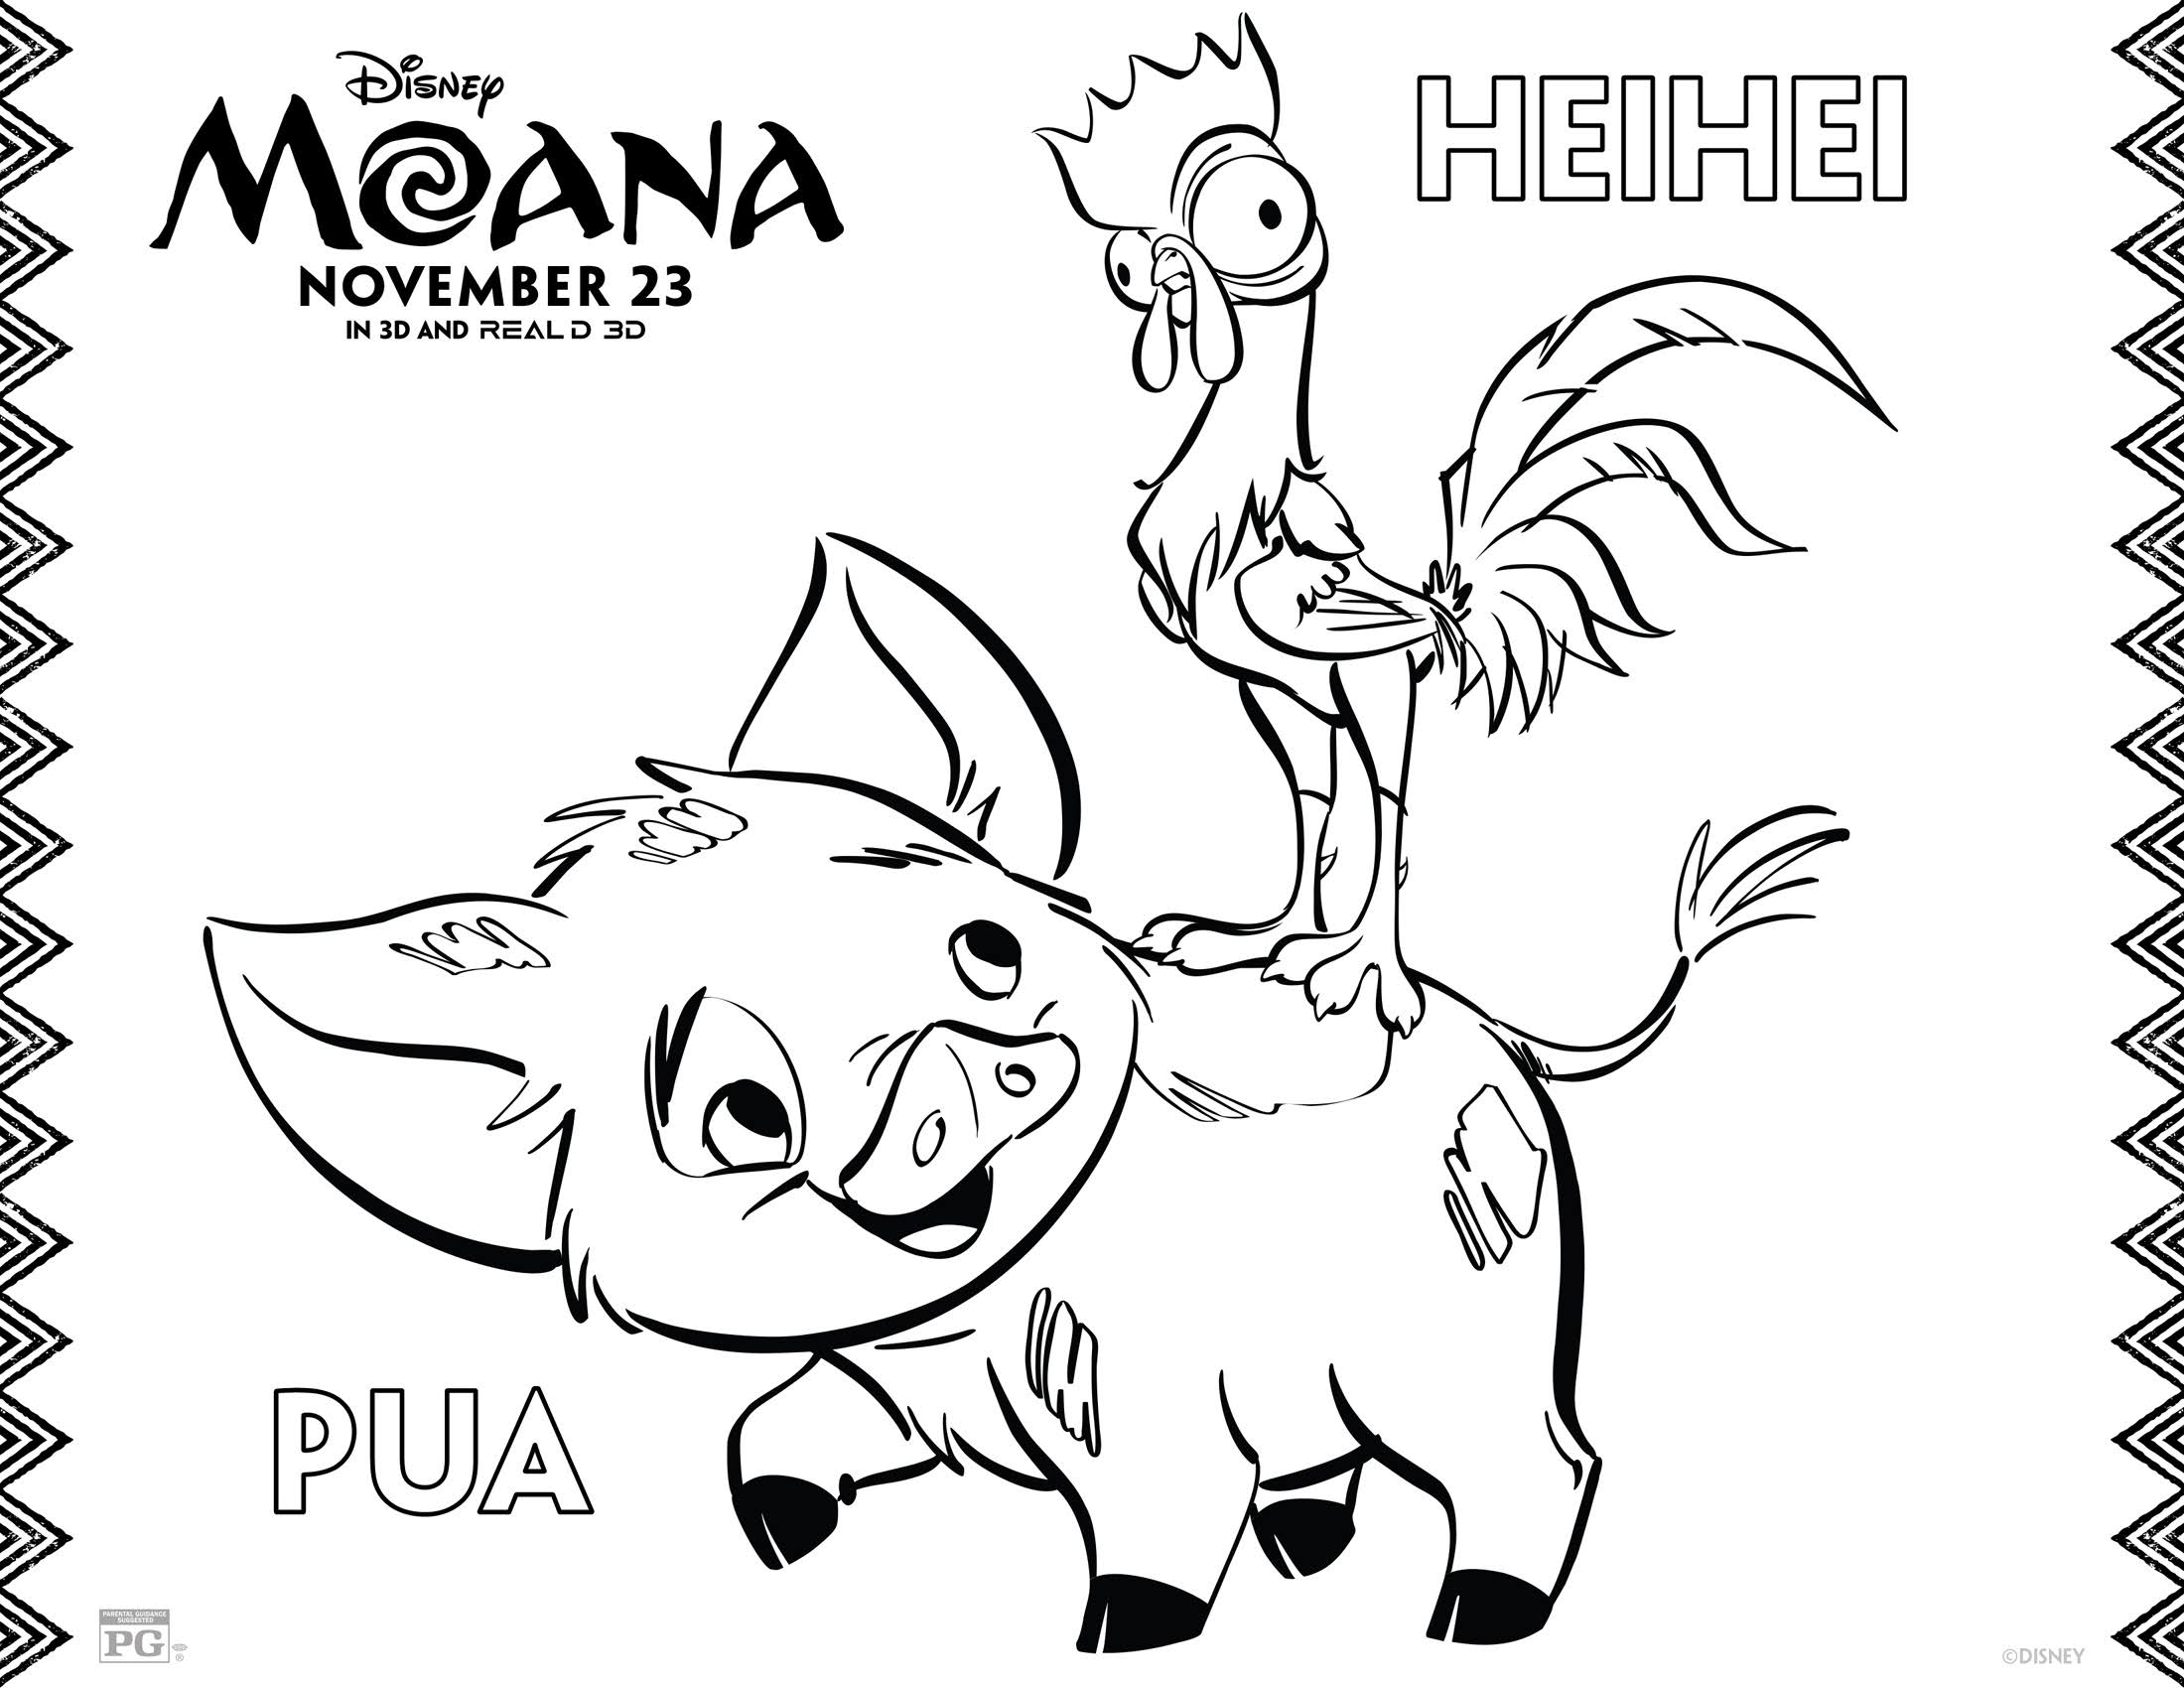 Moana Coloring Pages & Activity Sheets - The Healthy Mouse